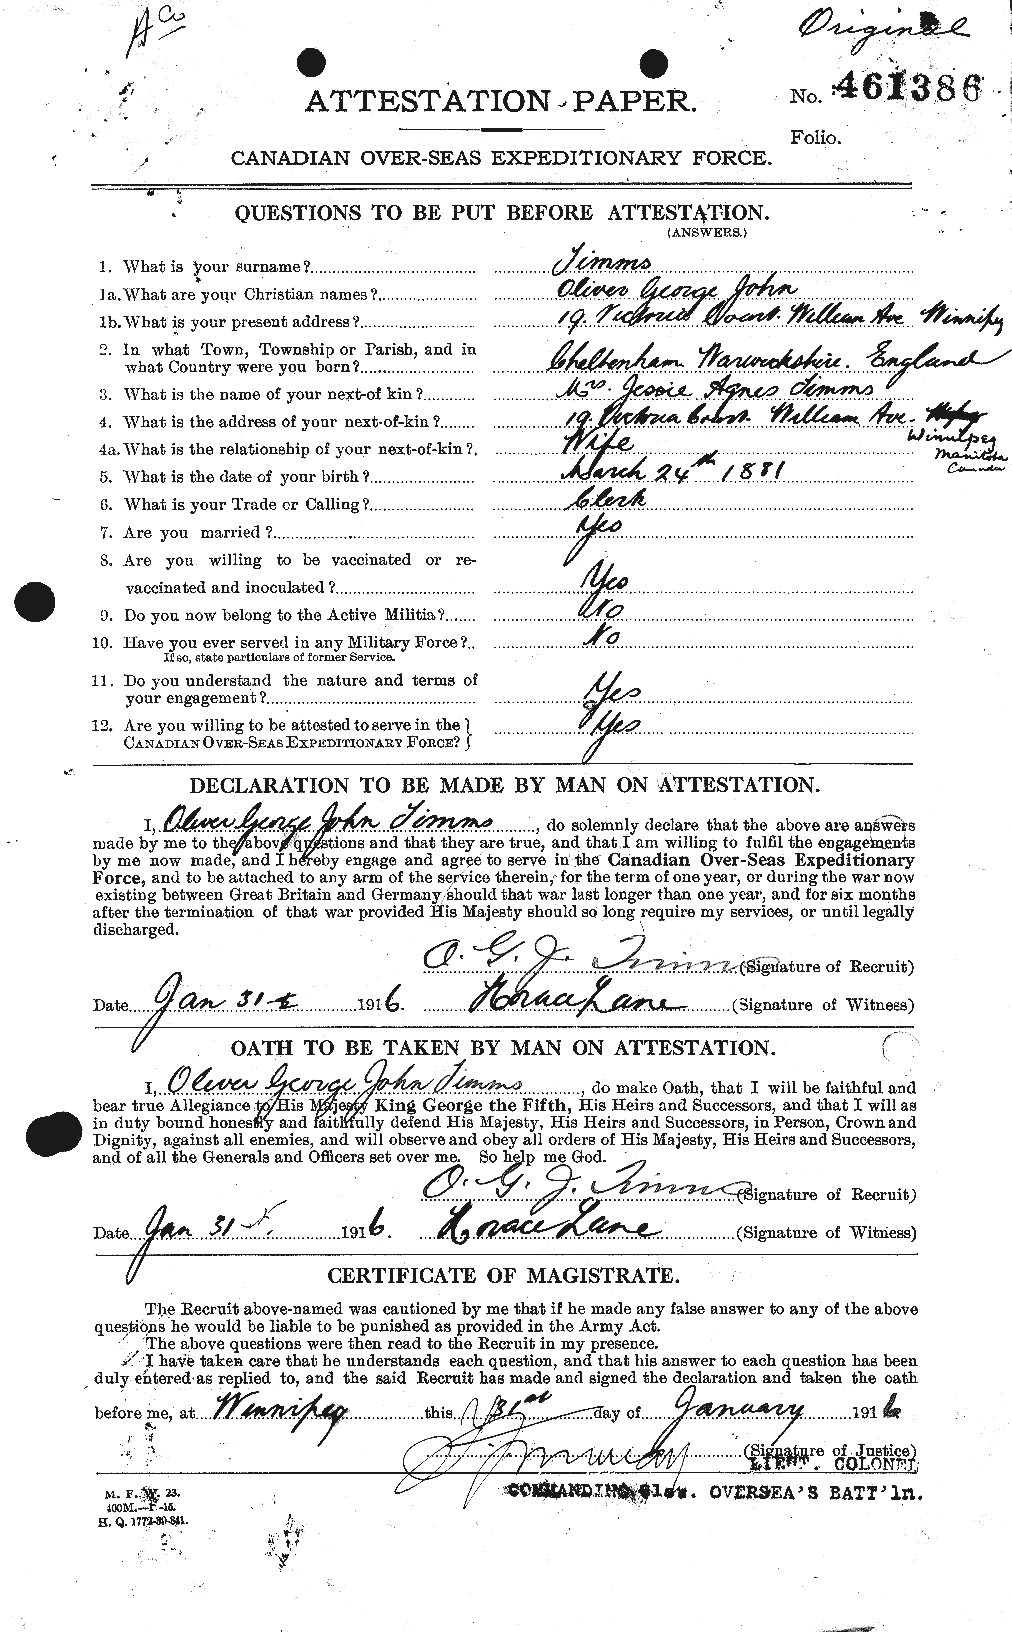 Personnel Records of the First World War - CEF 639913a